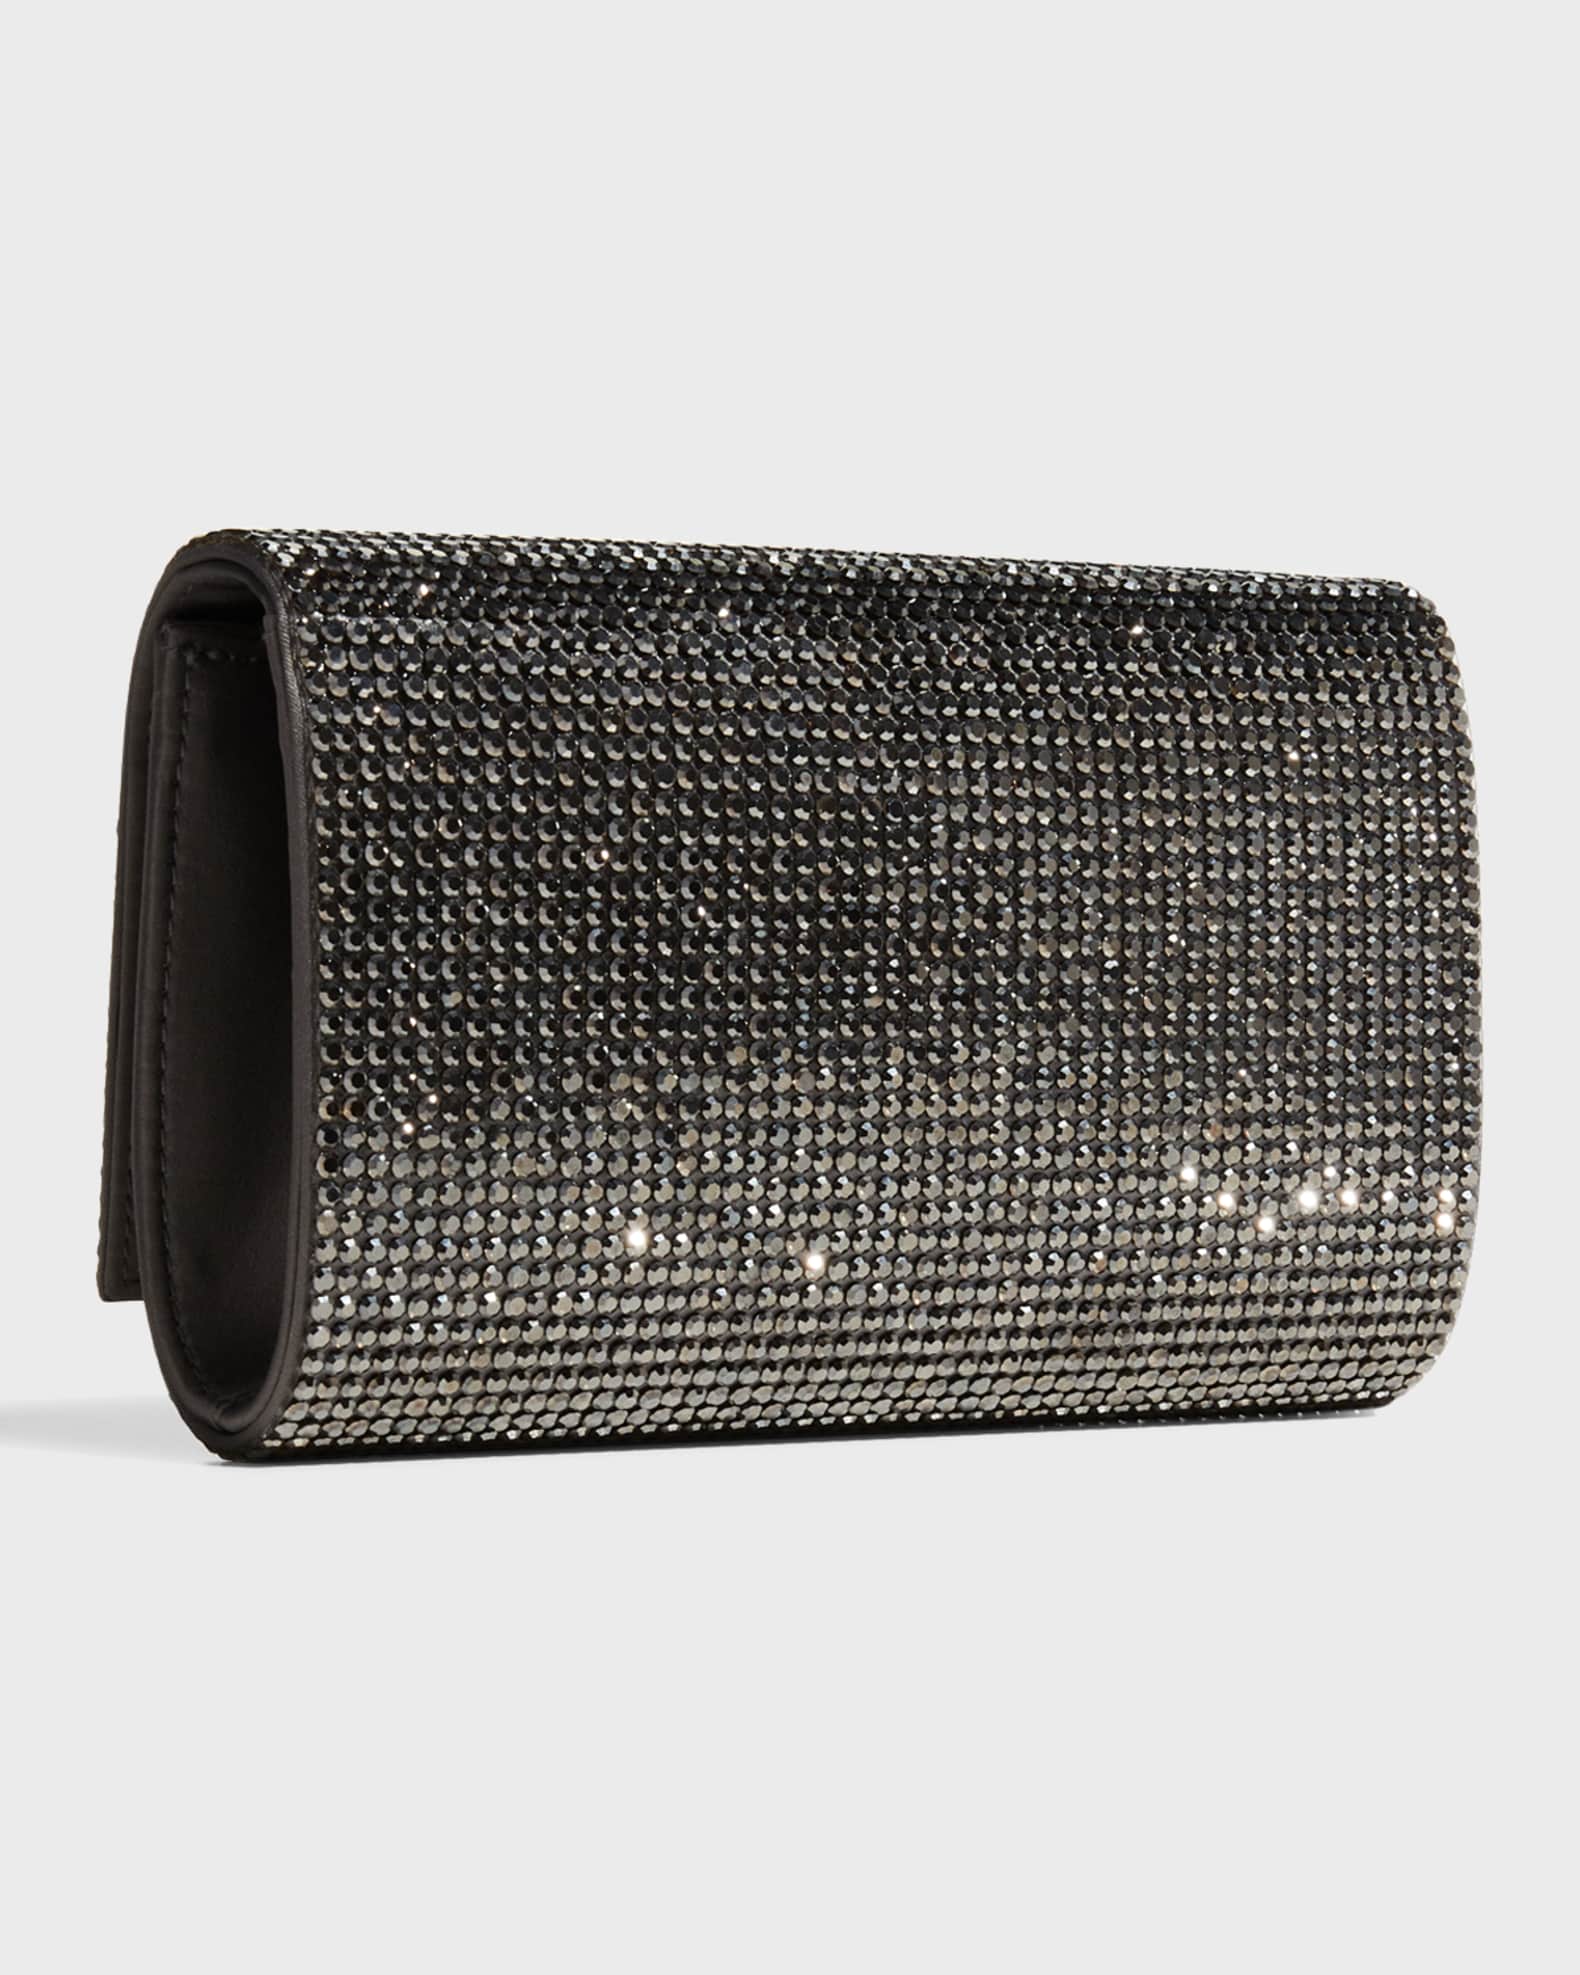 Judith Leiber American Beauty Crystal-embellished Clutch